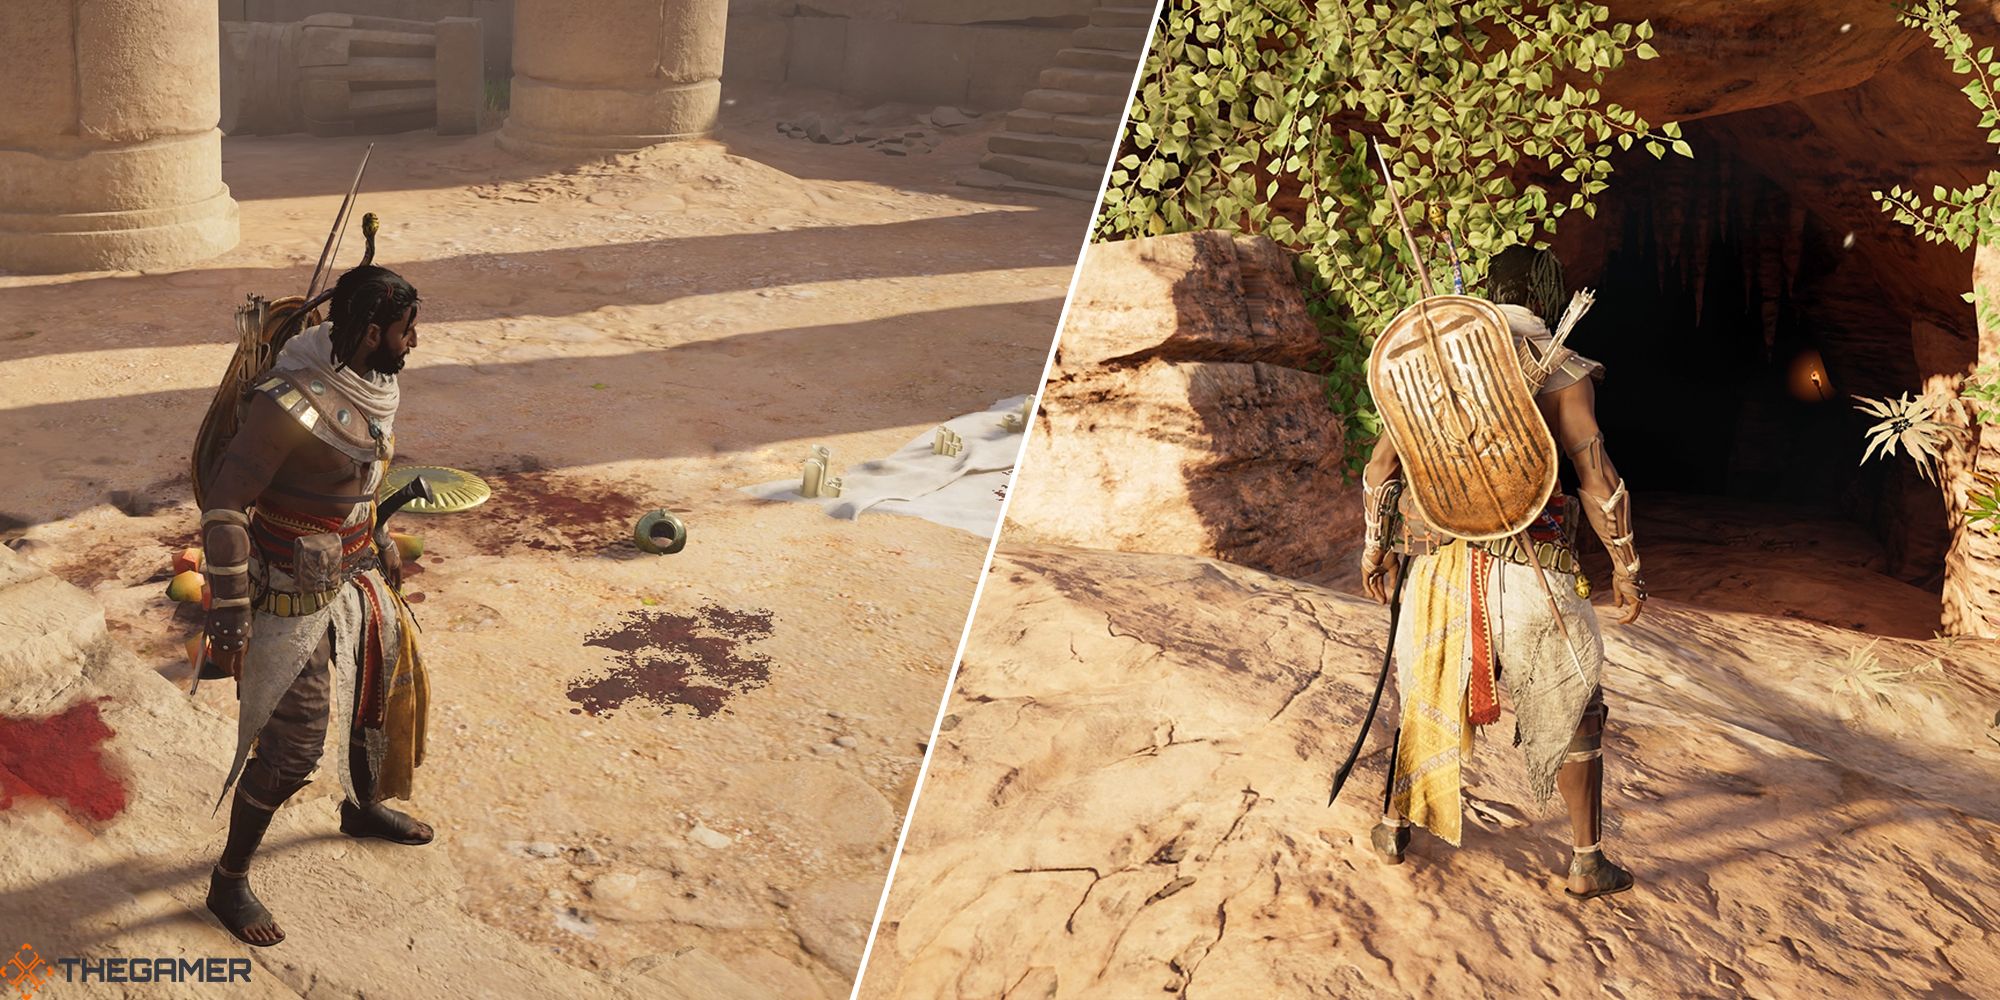 bayek near blood stains and a cave entrance split